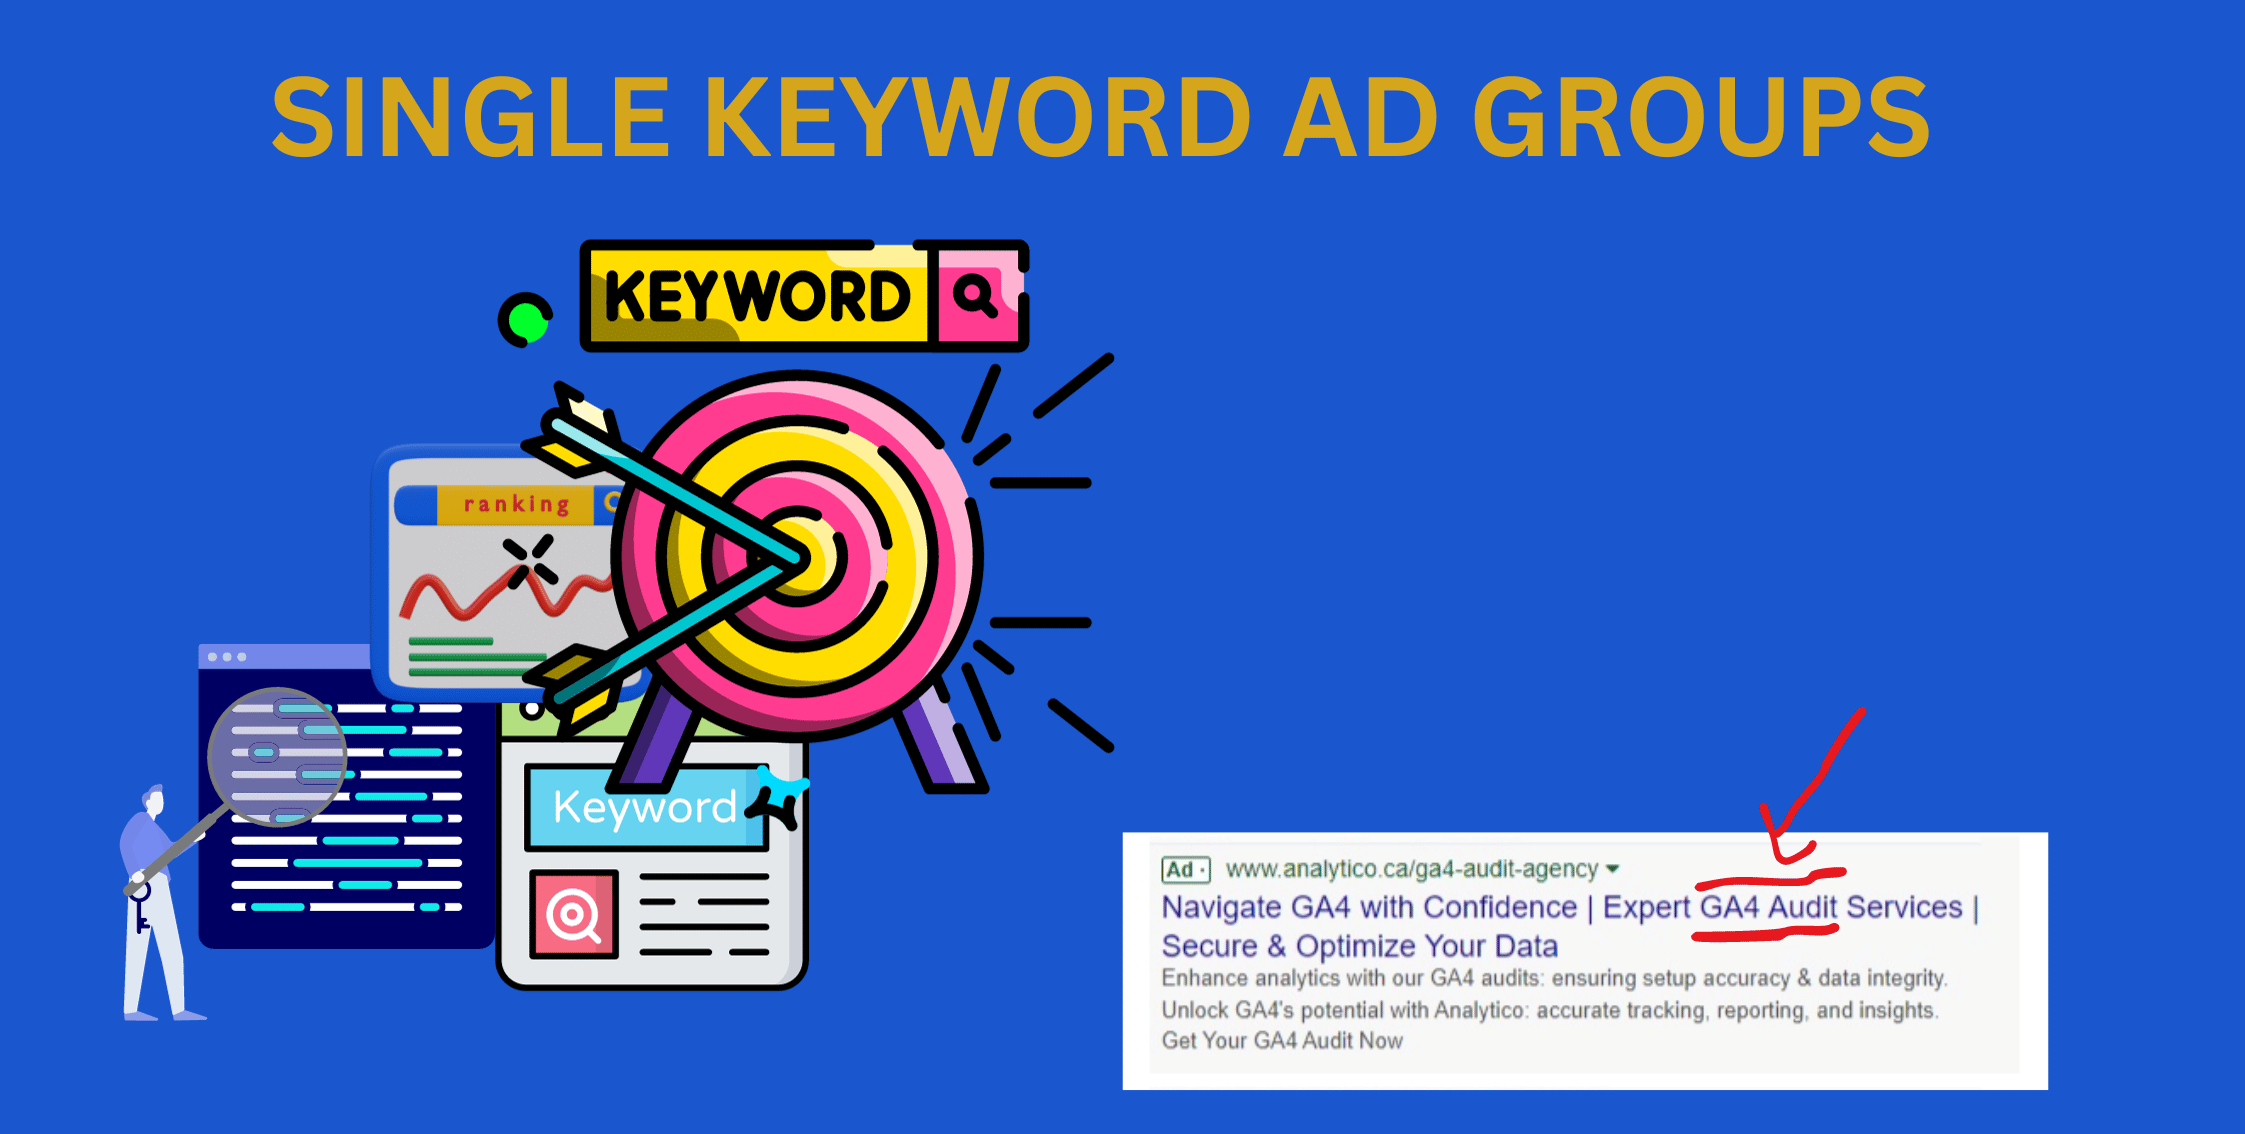 Single Keyword AdGroups - When and How to use?